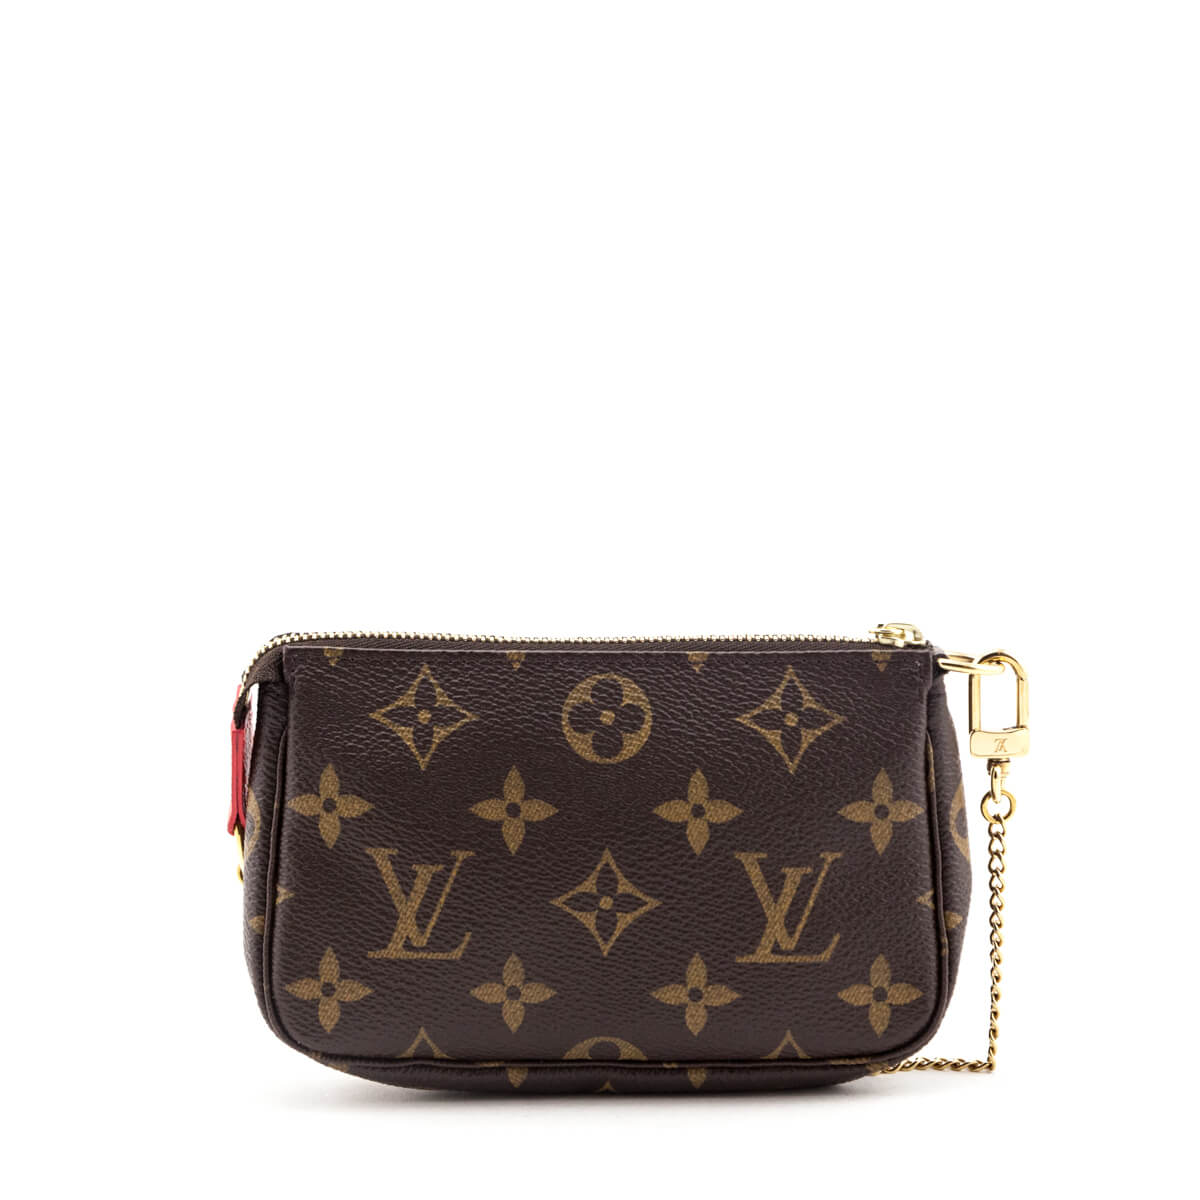 LV Illustre Mini Pochette with Concierge and Lady Painting